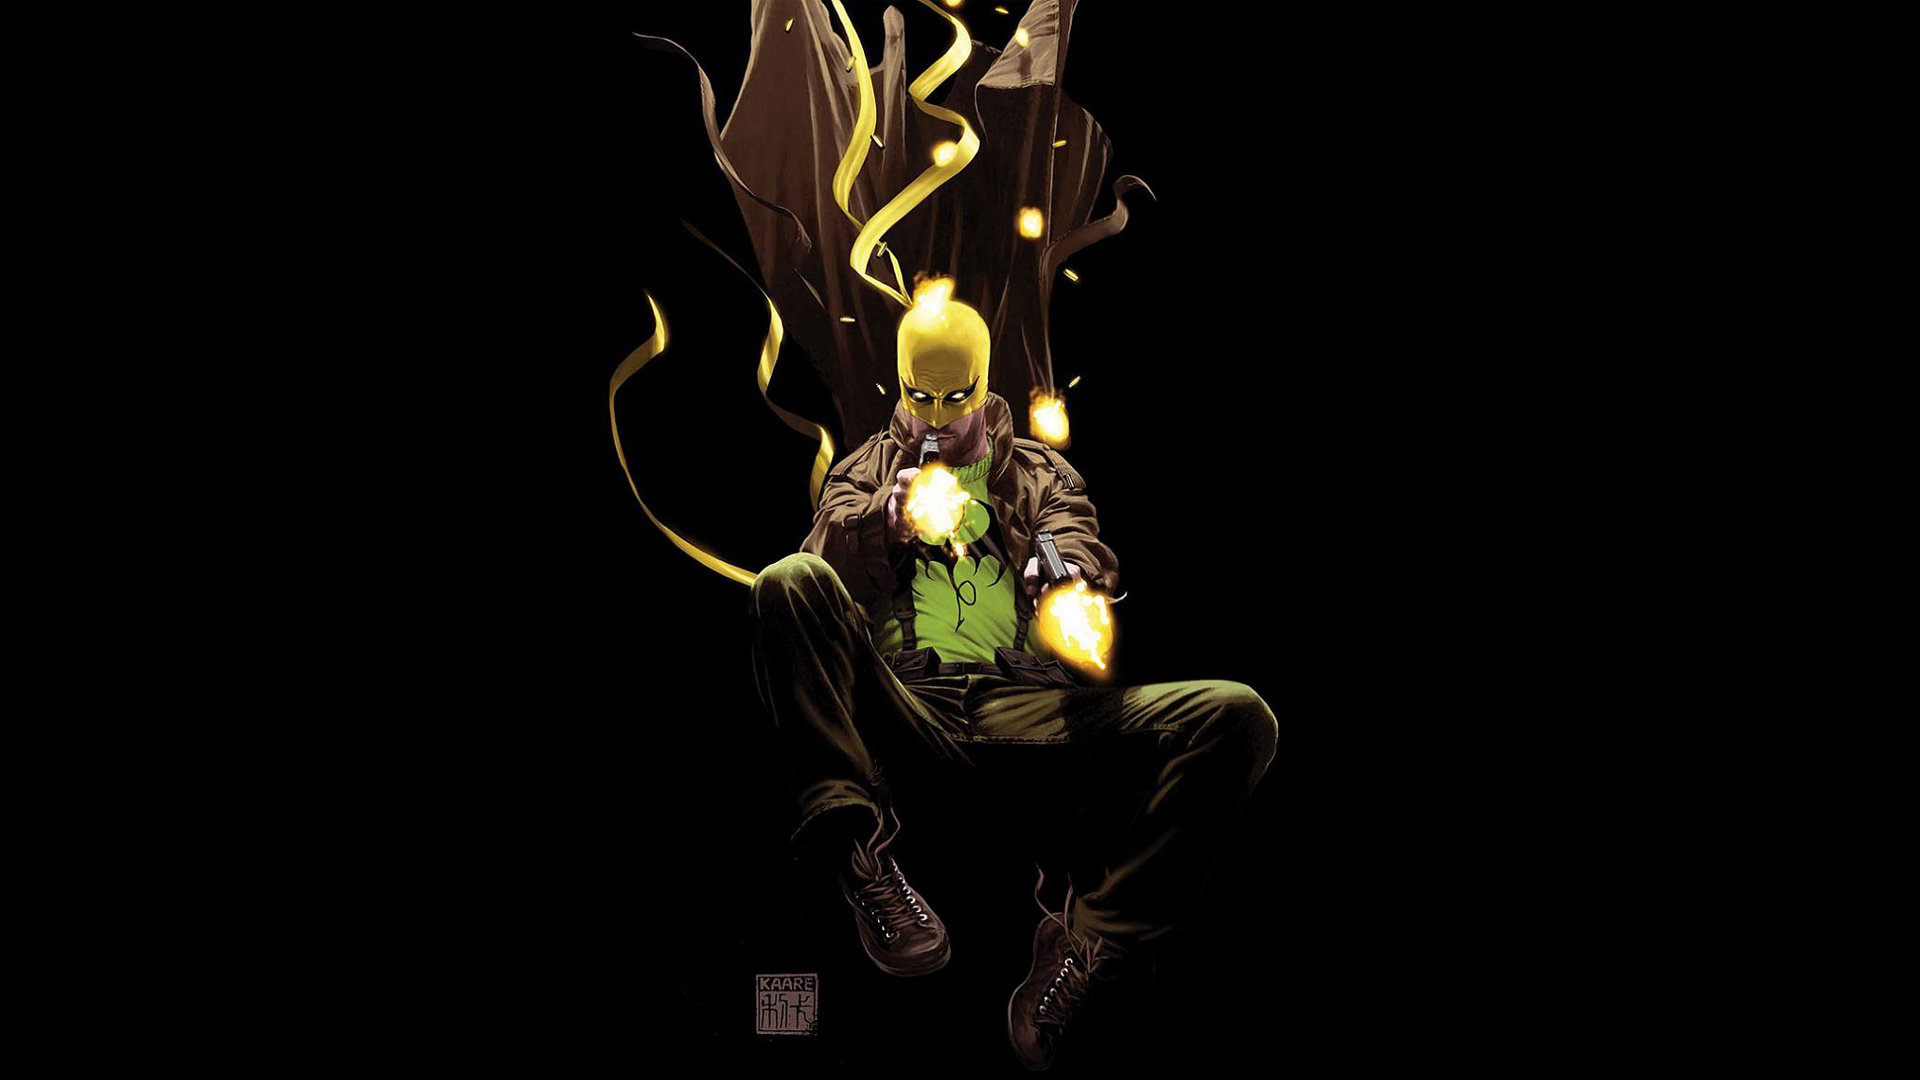 Download full hd 1080p Iron Fist PC background ID:254178 for free